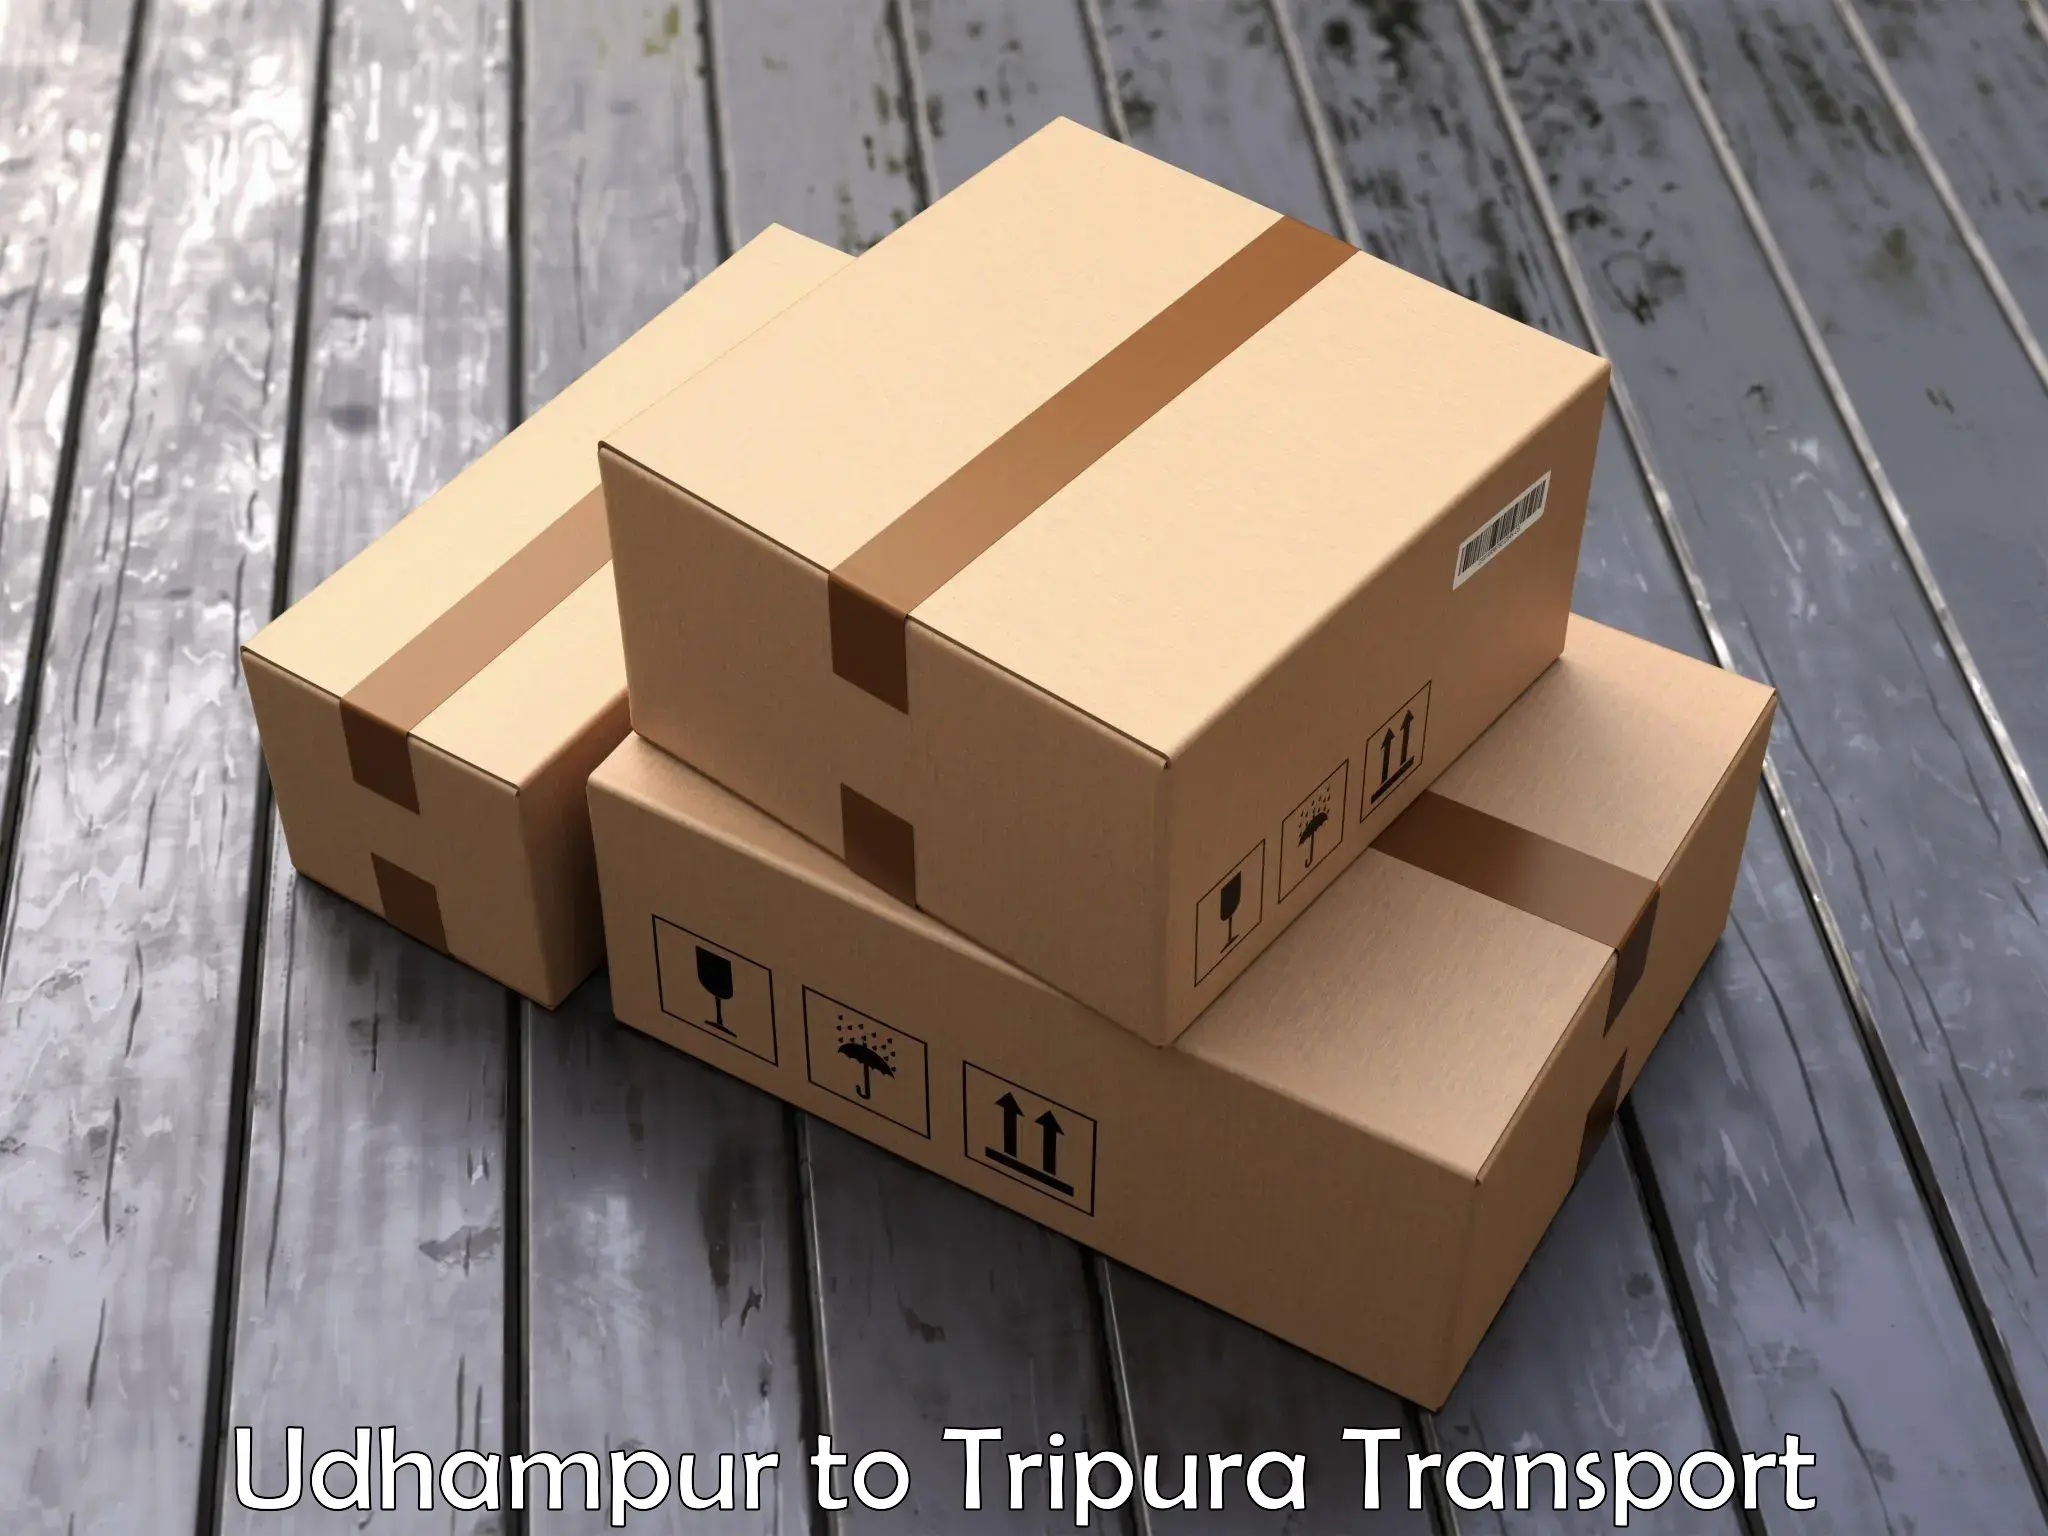 Lorry transport service in Udhampur to Dharmanagar